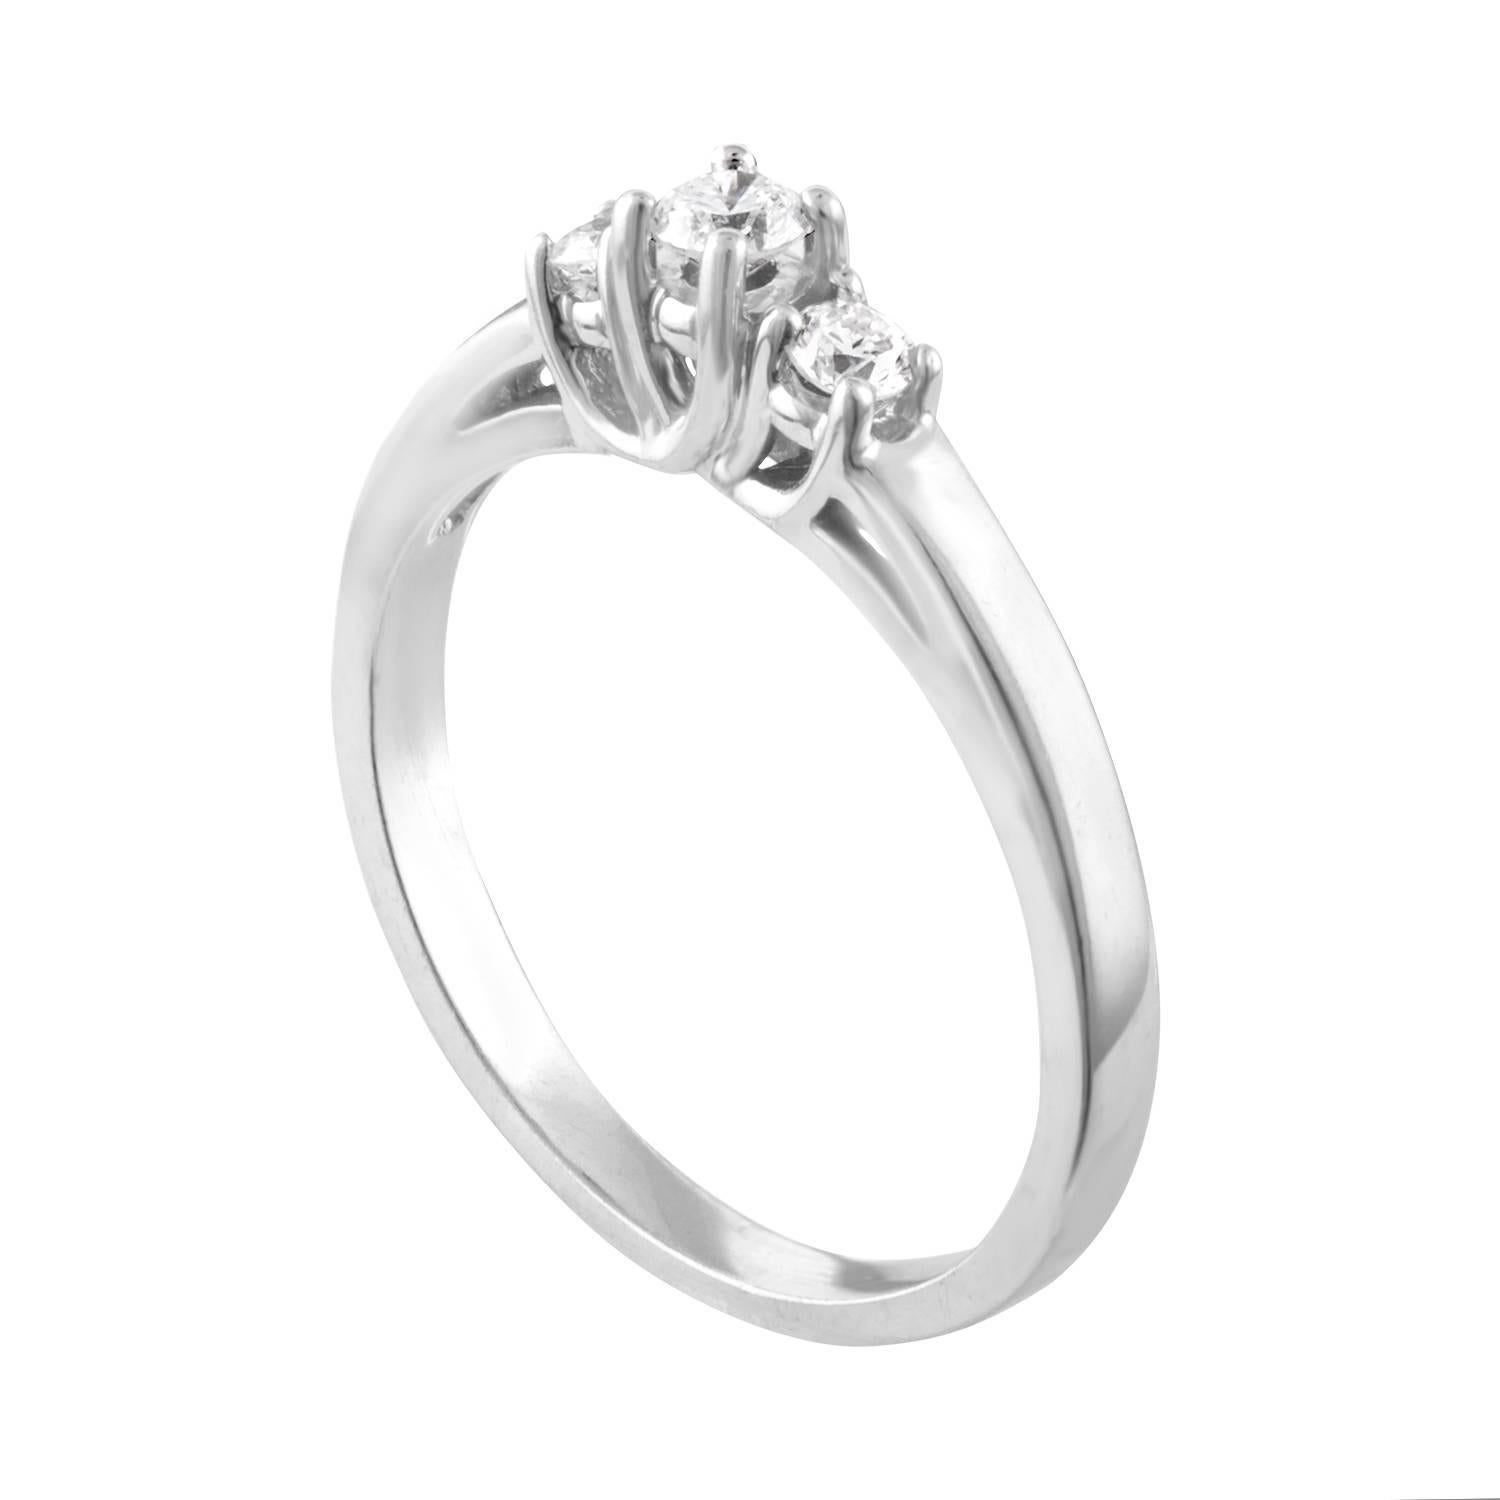 Delicate Three-Stone Ring Great For Stacking
The ring is 14K White Gold
There are 0.20 Carats in Diamonds H I3
The ring is a size 6.5, sizable
The ring weighs 2.5 grams